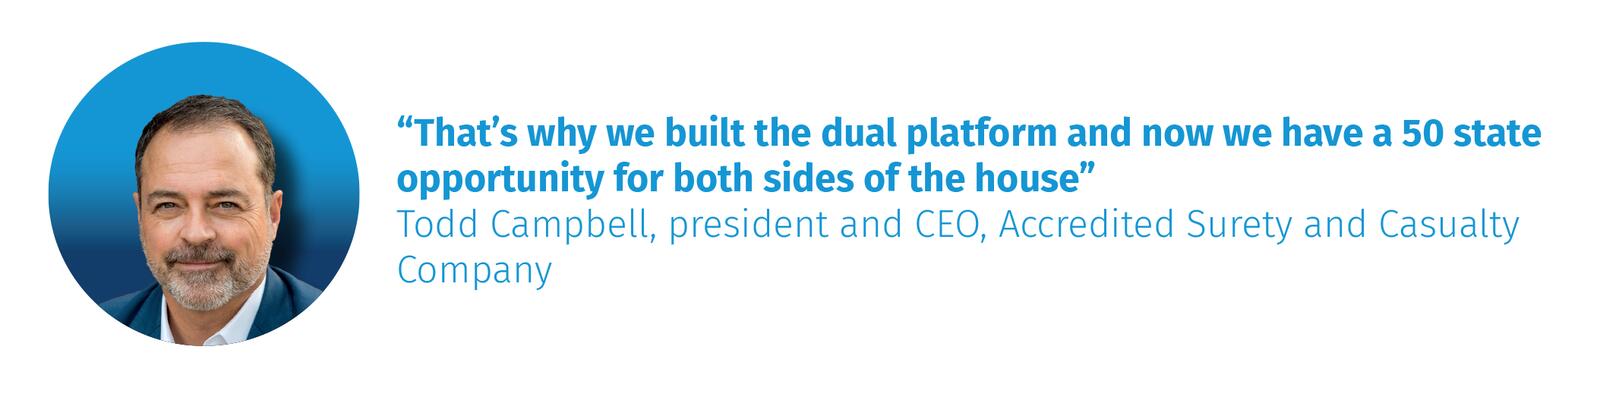 “That’s why we built the dual platform and now we have a 50 state opportunity for both sides of the house” Todd Campbell, president and CEO, Accredited Surety and Casualty Company